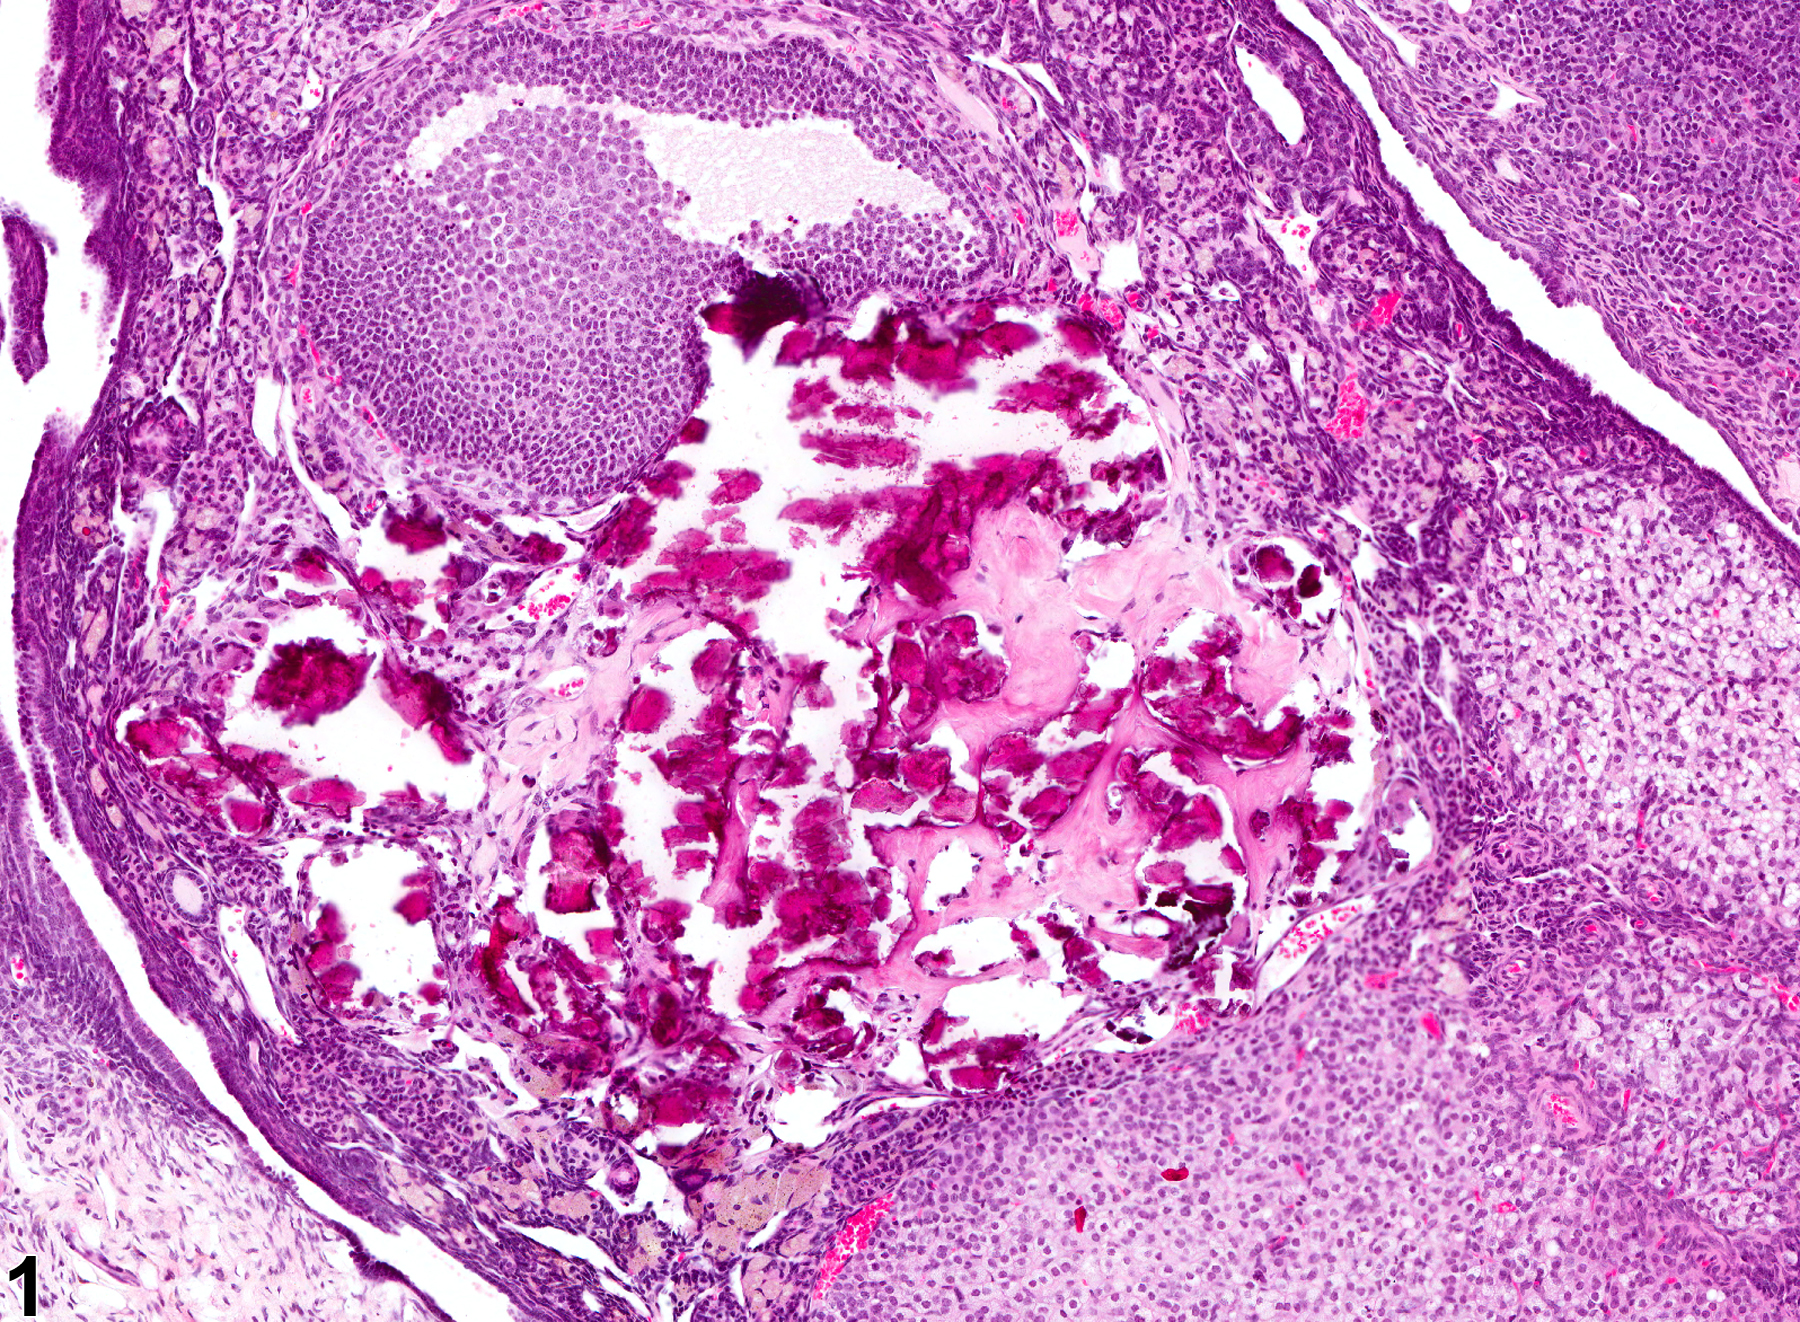 Image of metaplasia, osseous in the ovary from a female B6C3F1 mouse in a chronic study